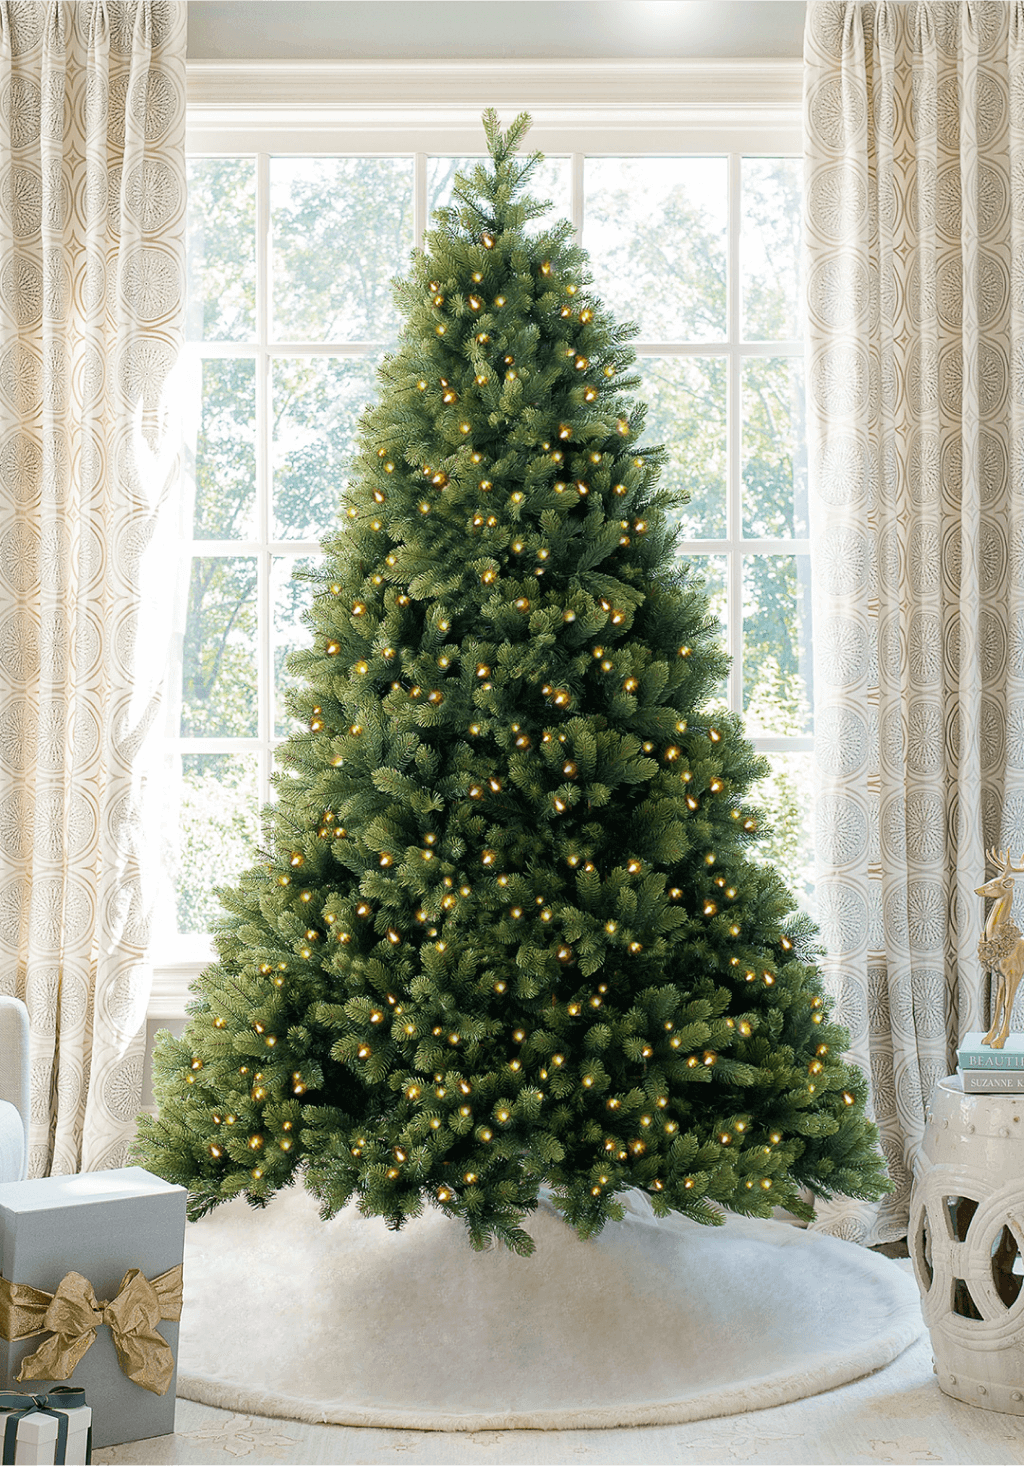 King of Christmas 12' Royal Fir Quick-Shape Artificial Christmas Tree with 2000 Warm White & Multi-Color LED Lights